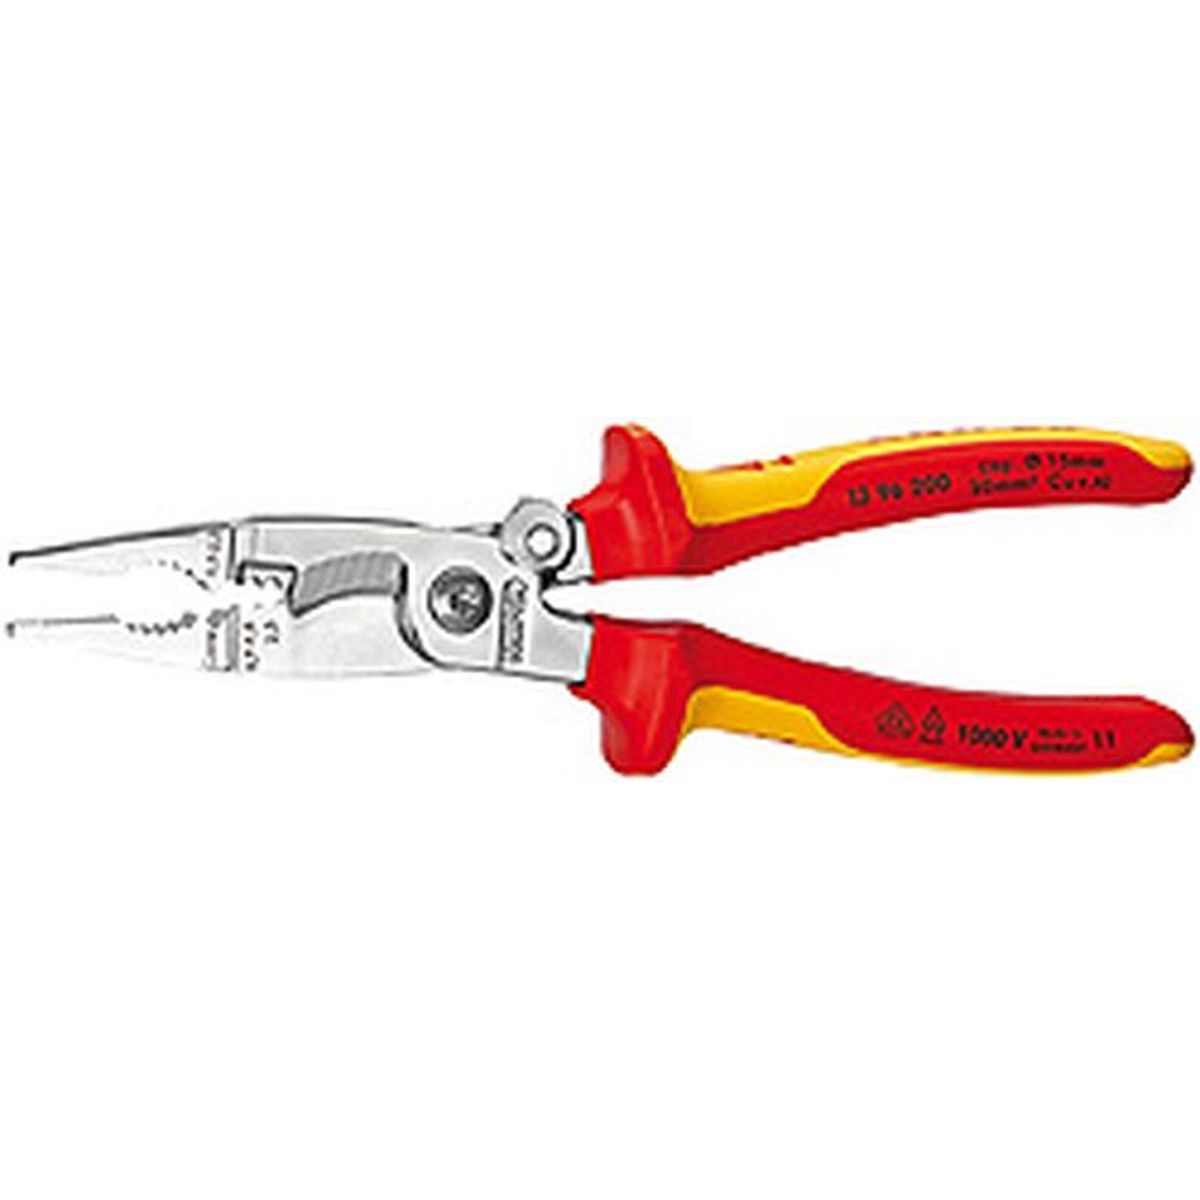 Pliers for Electrical Installation 1396 200mm Knipex